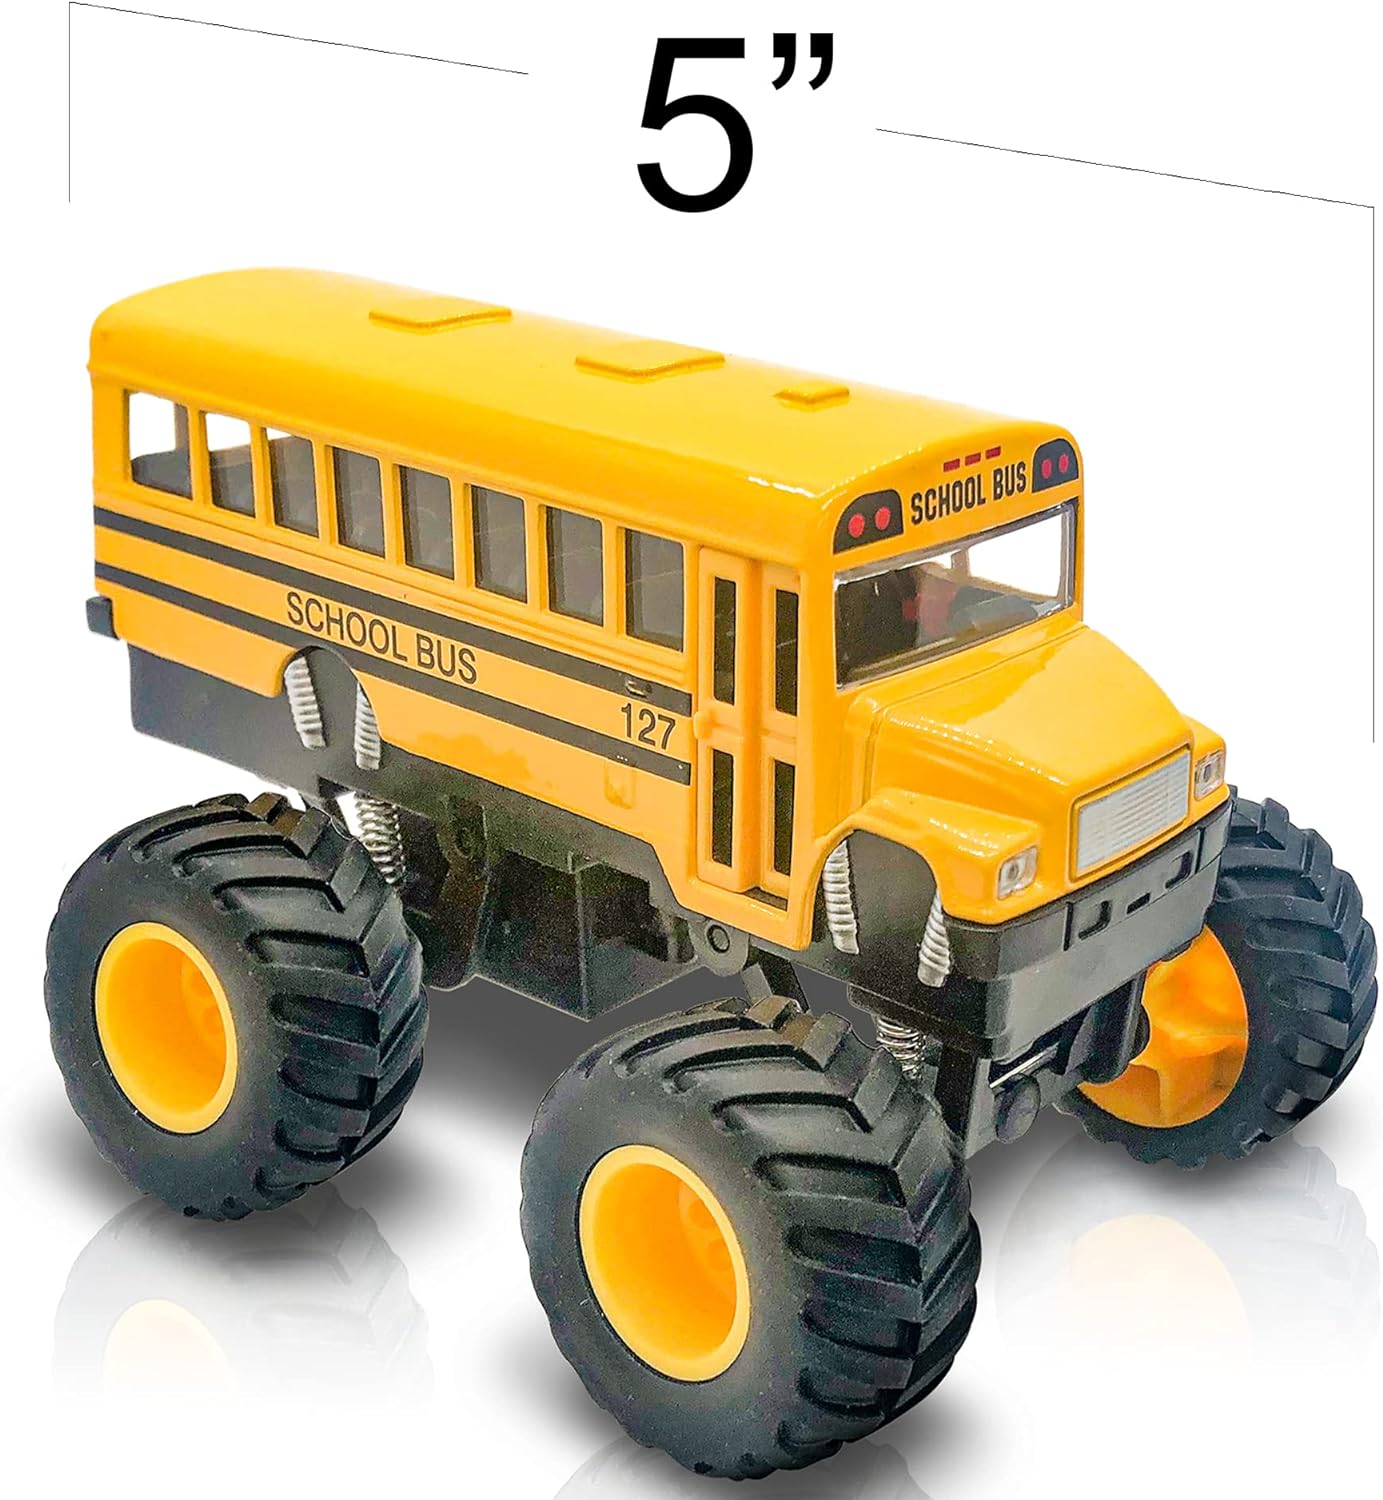 5 Inch Monster School Bus, Super Monster Bus with Pullback Mechanism, Diecast Monster Truck Bus for Kids, Big Wheels Monster Truck Toys, Play Vehicle Gifts for Boys